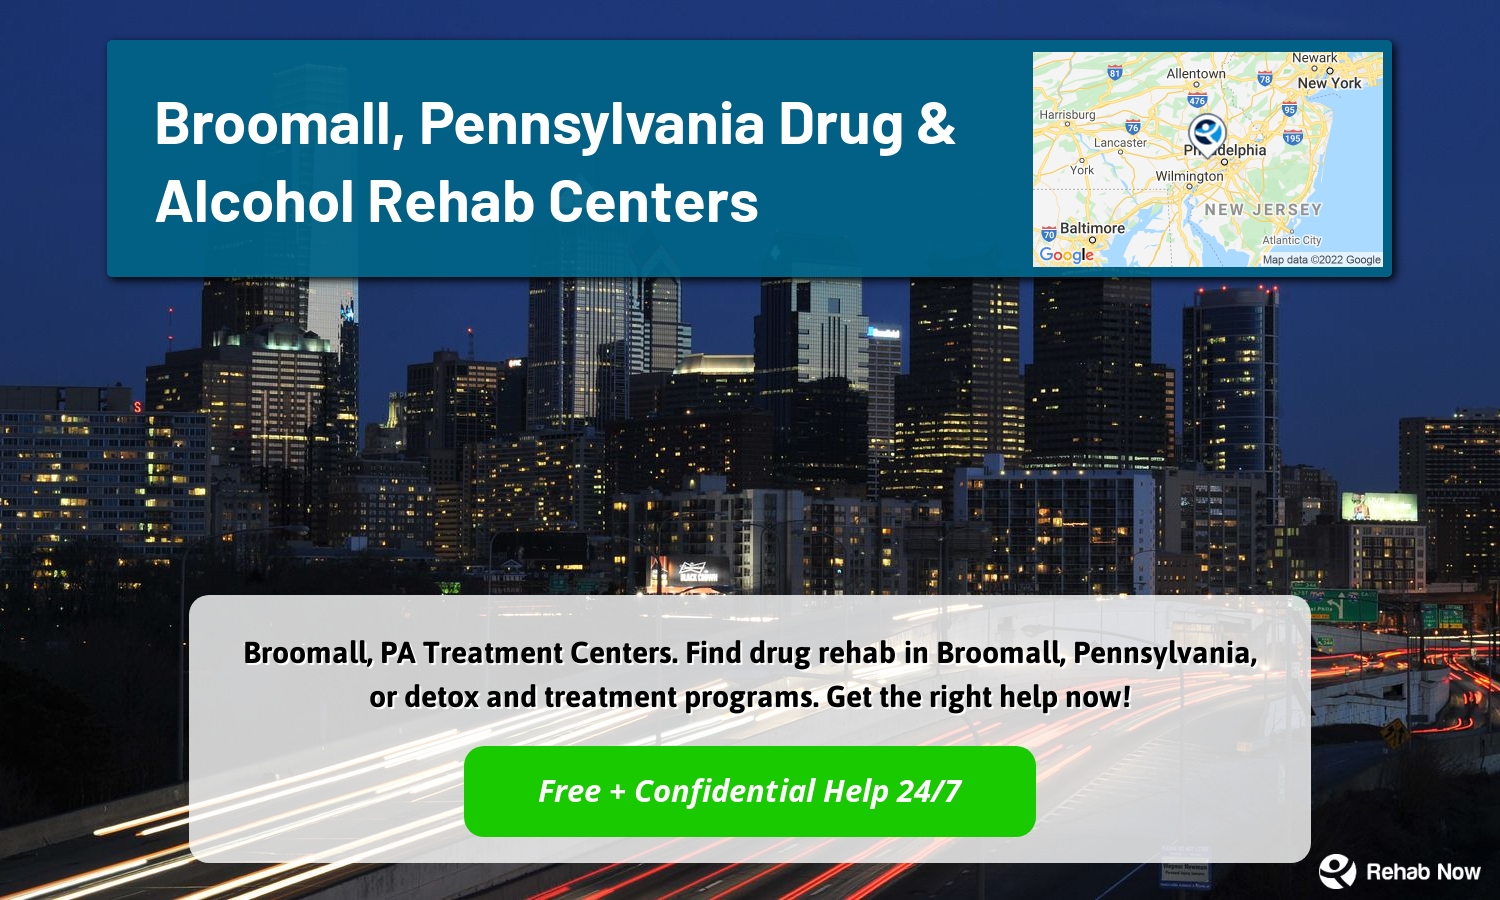 Broomall, PA Treatment Centers. Find drug rehab in Broomall, Pennsylvania, or detox and treatment programs. Get the right help now!